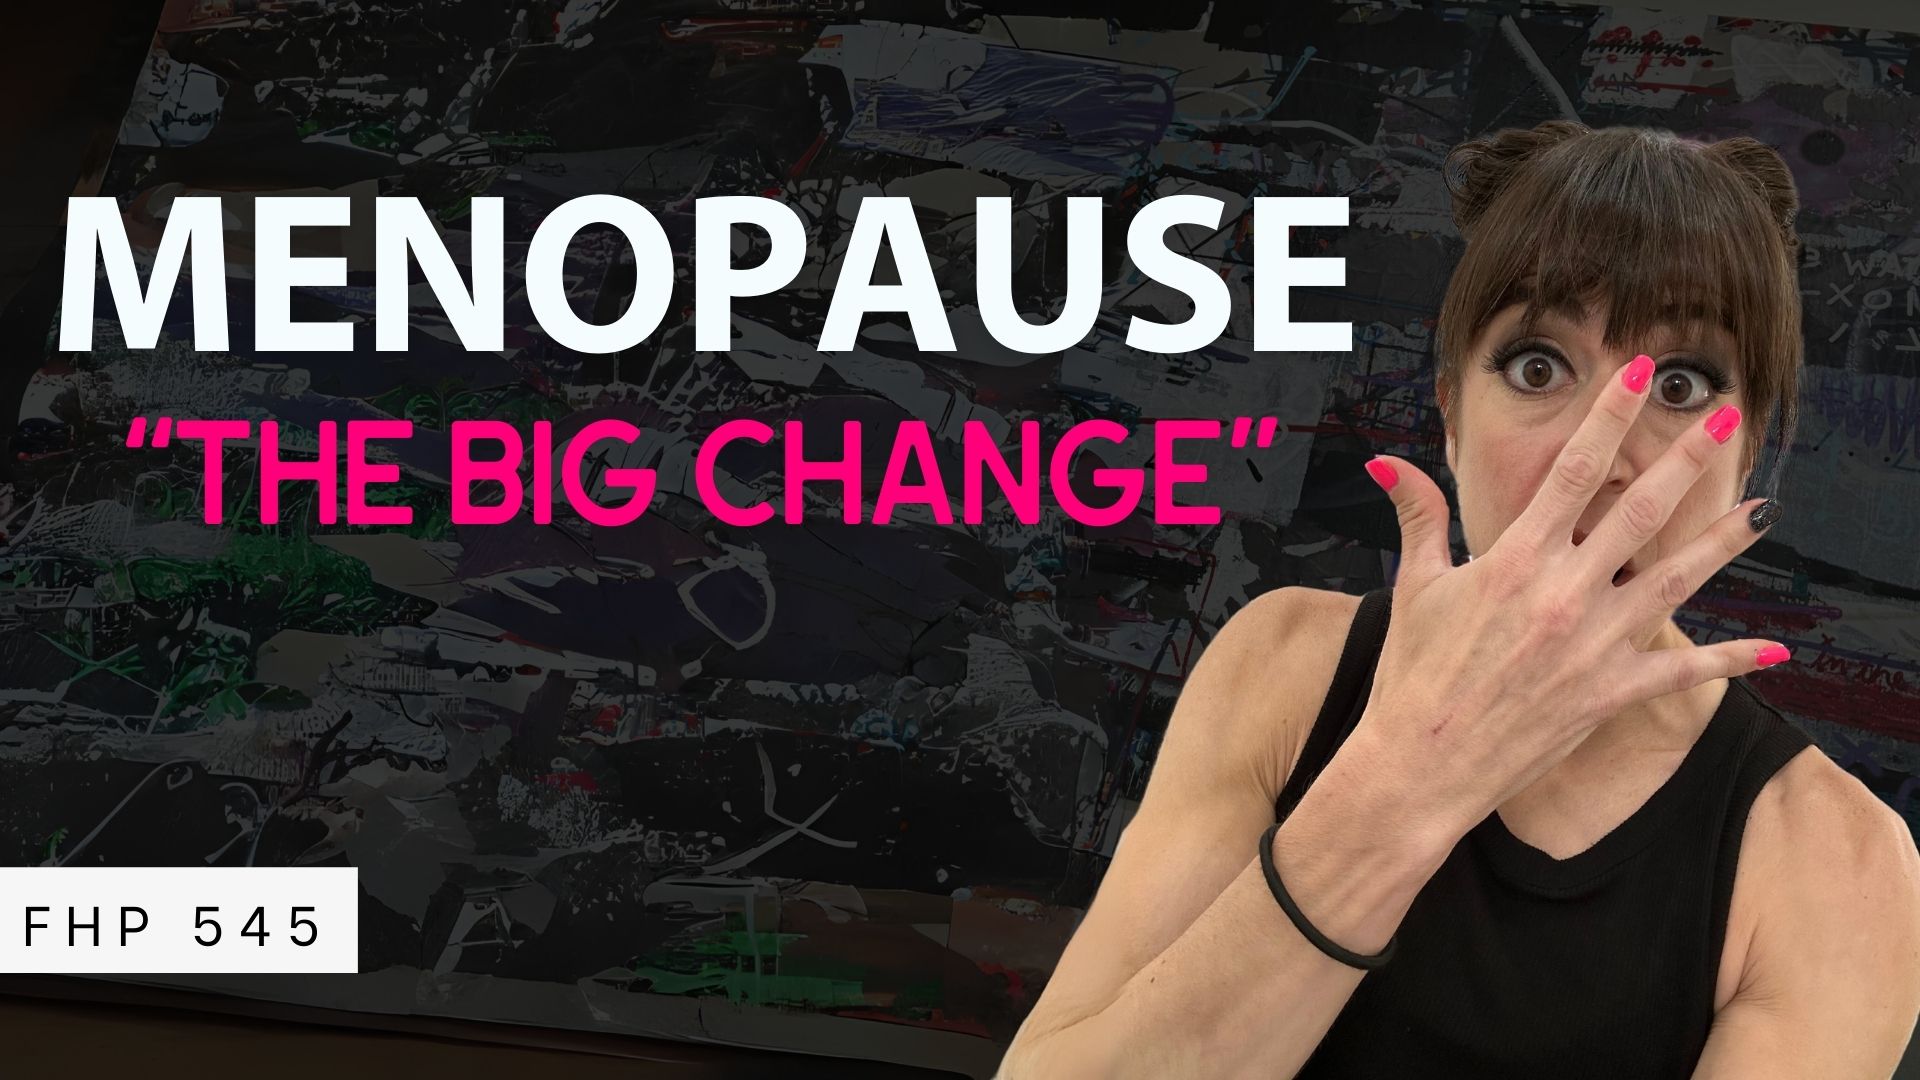 FHP 545 – Menopause – “The Big Change”